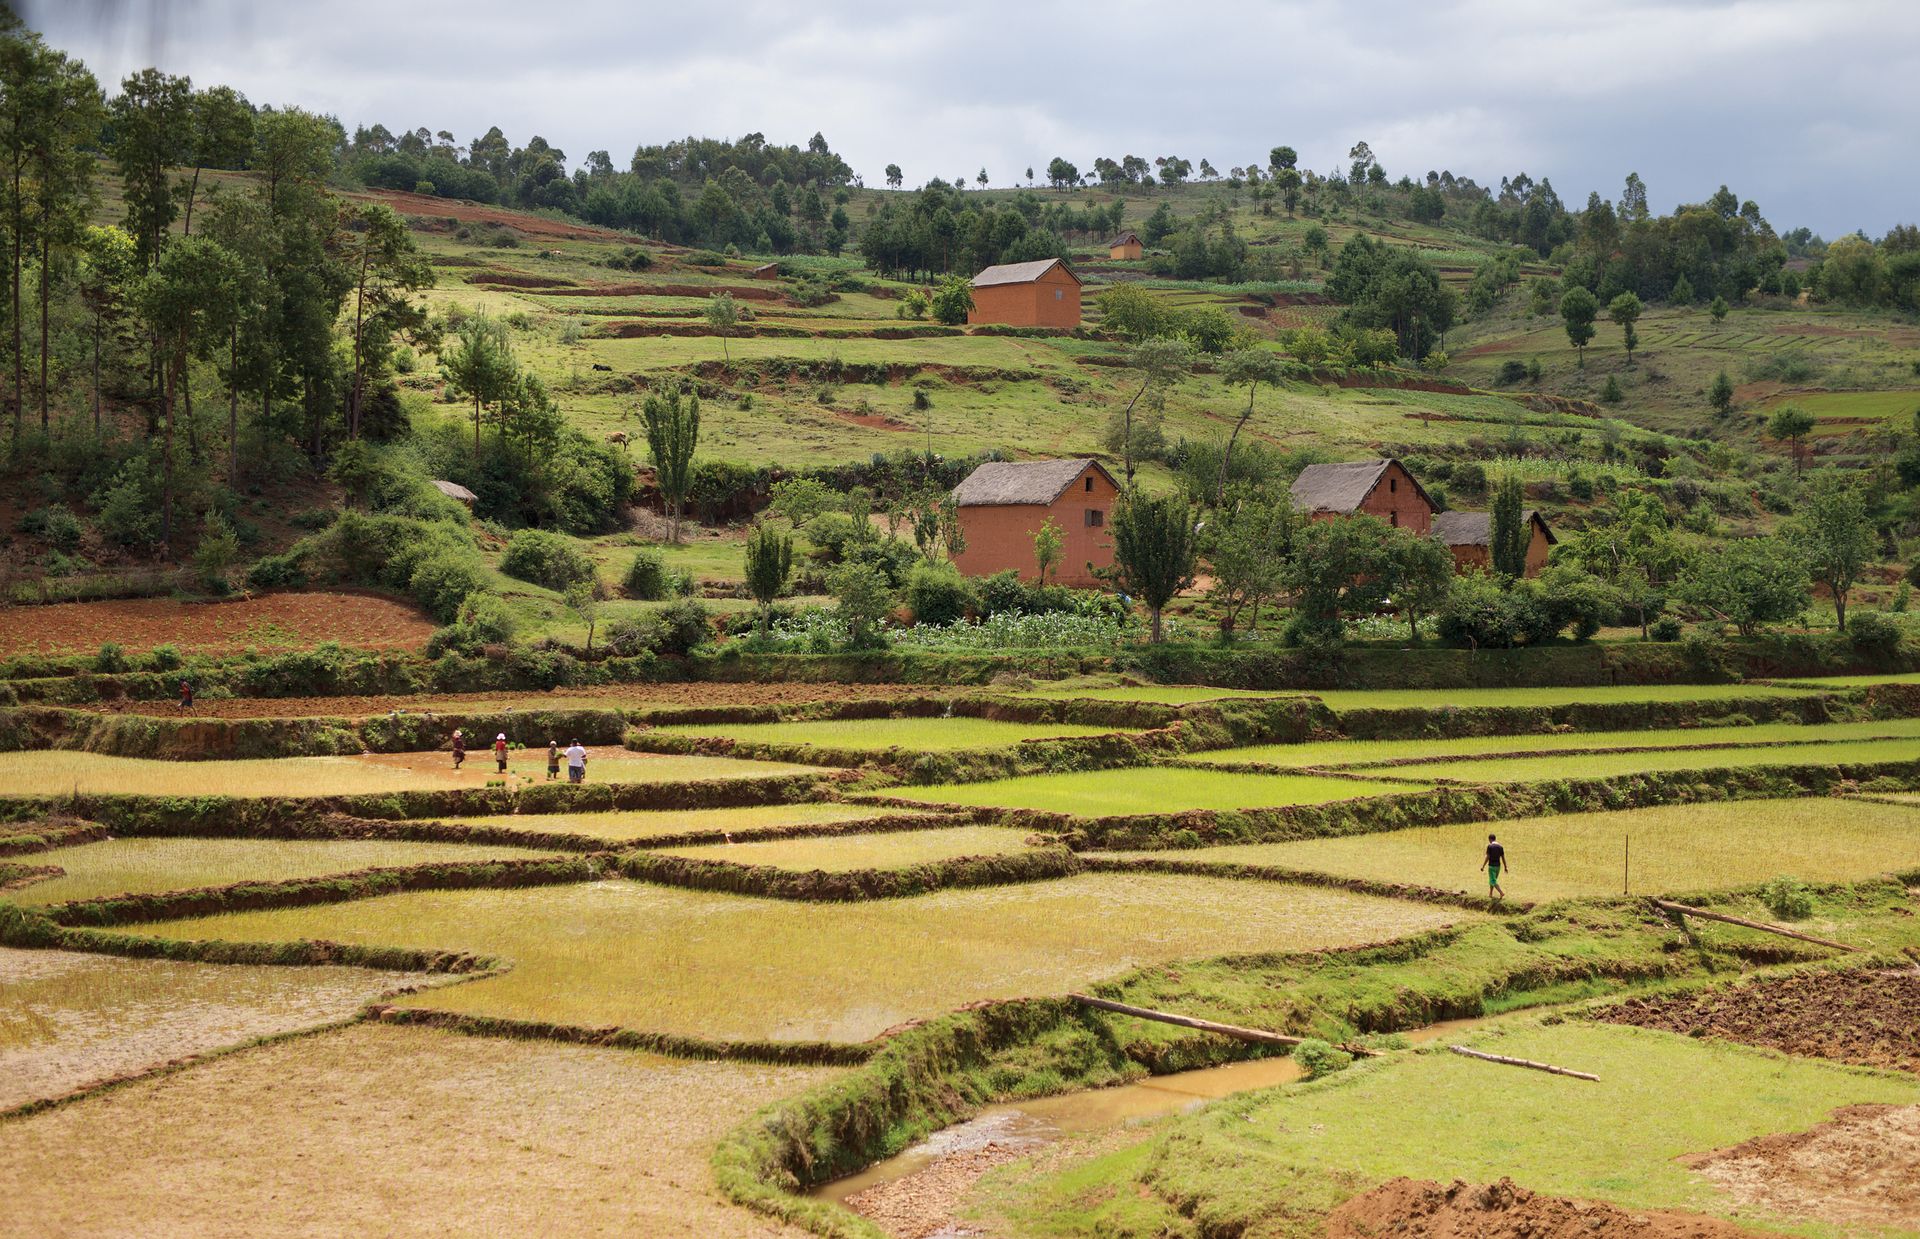 Rice is a staple crop in Madagascar. Nearly everyone in Sarodroa works in the rice fields to support their families.